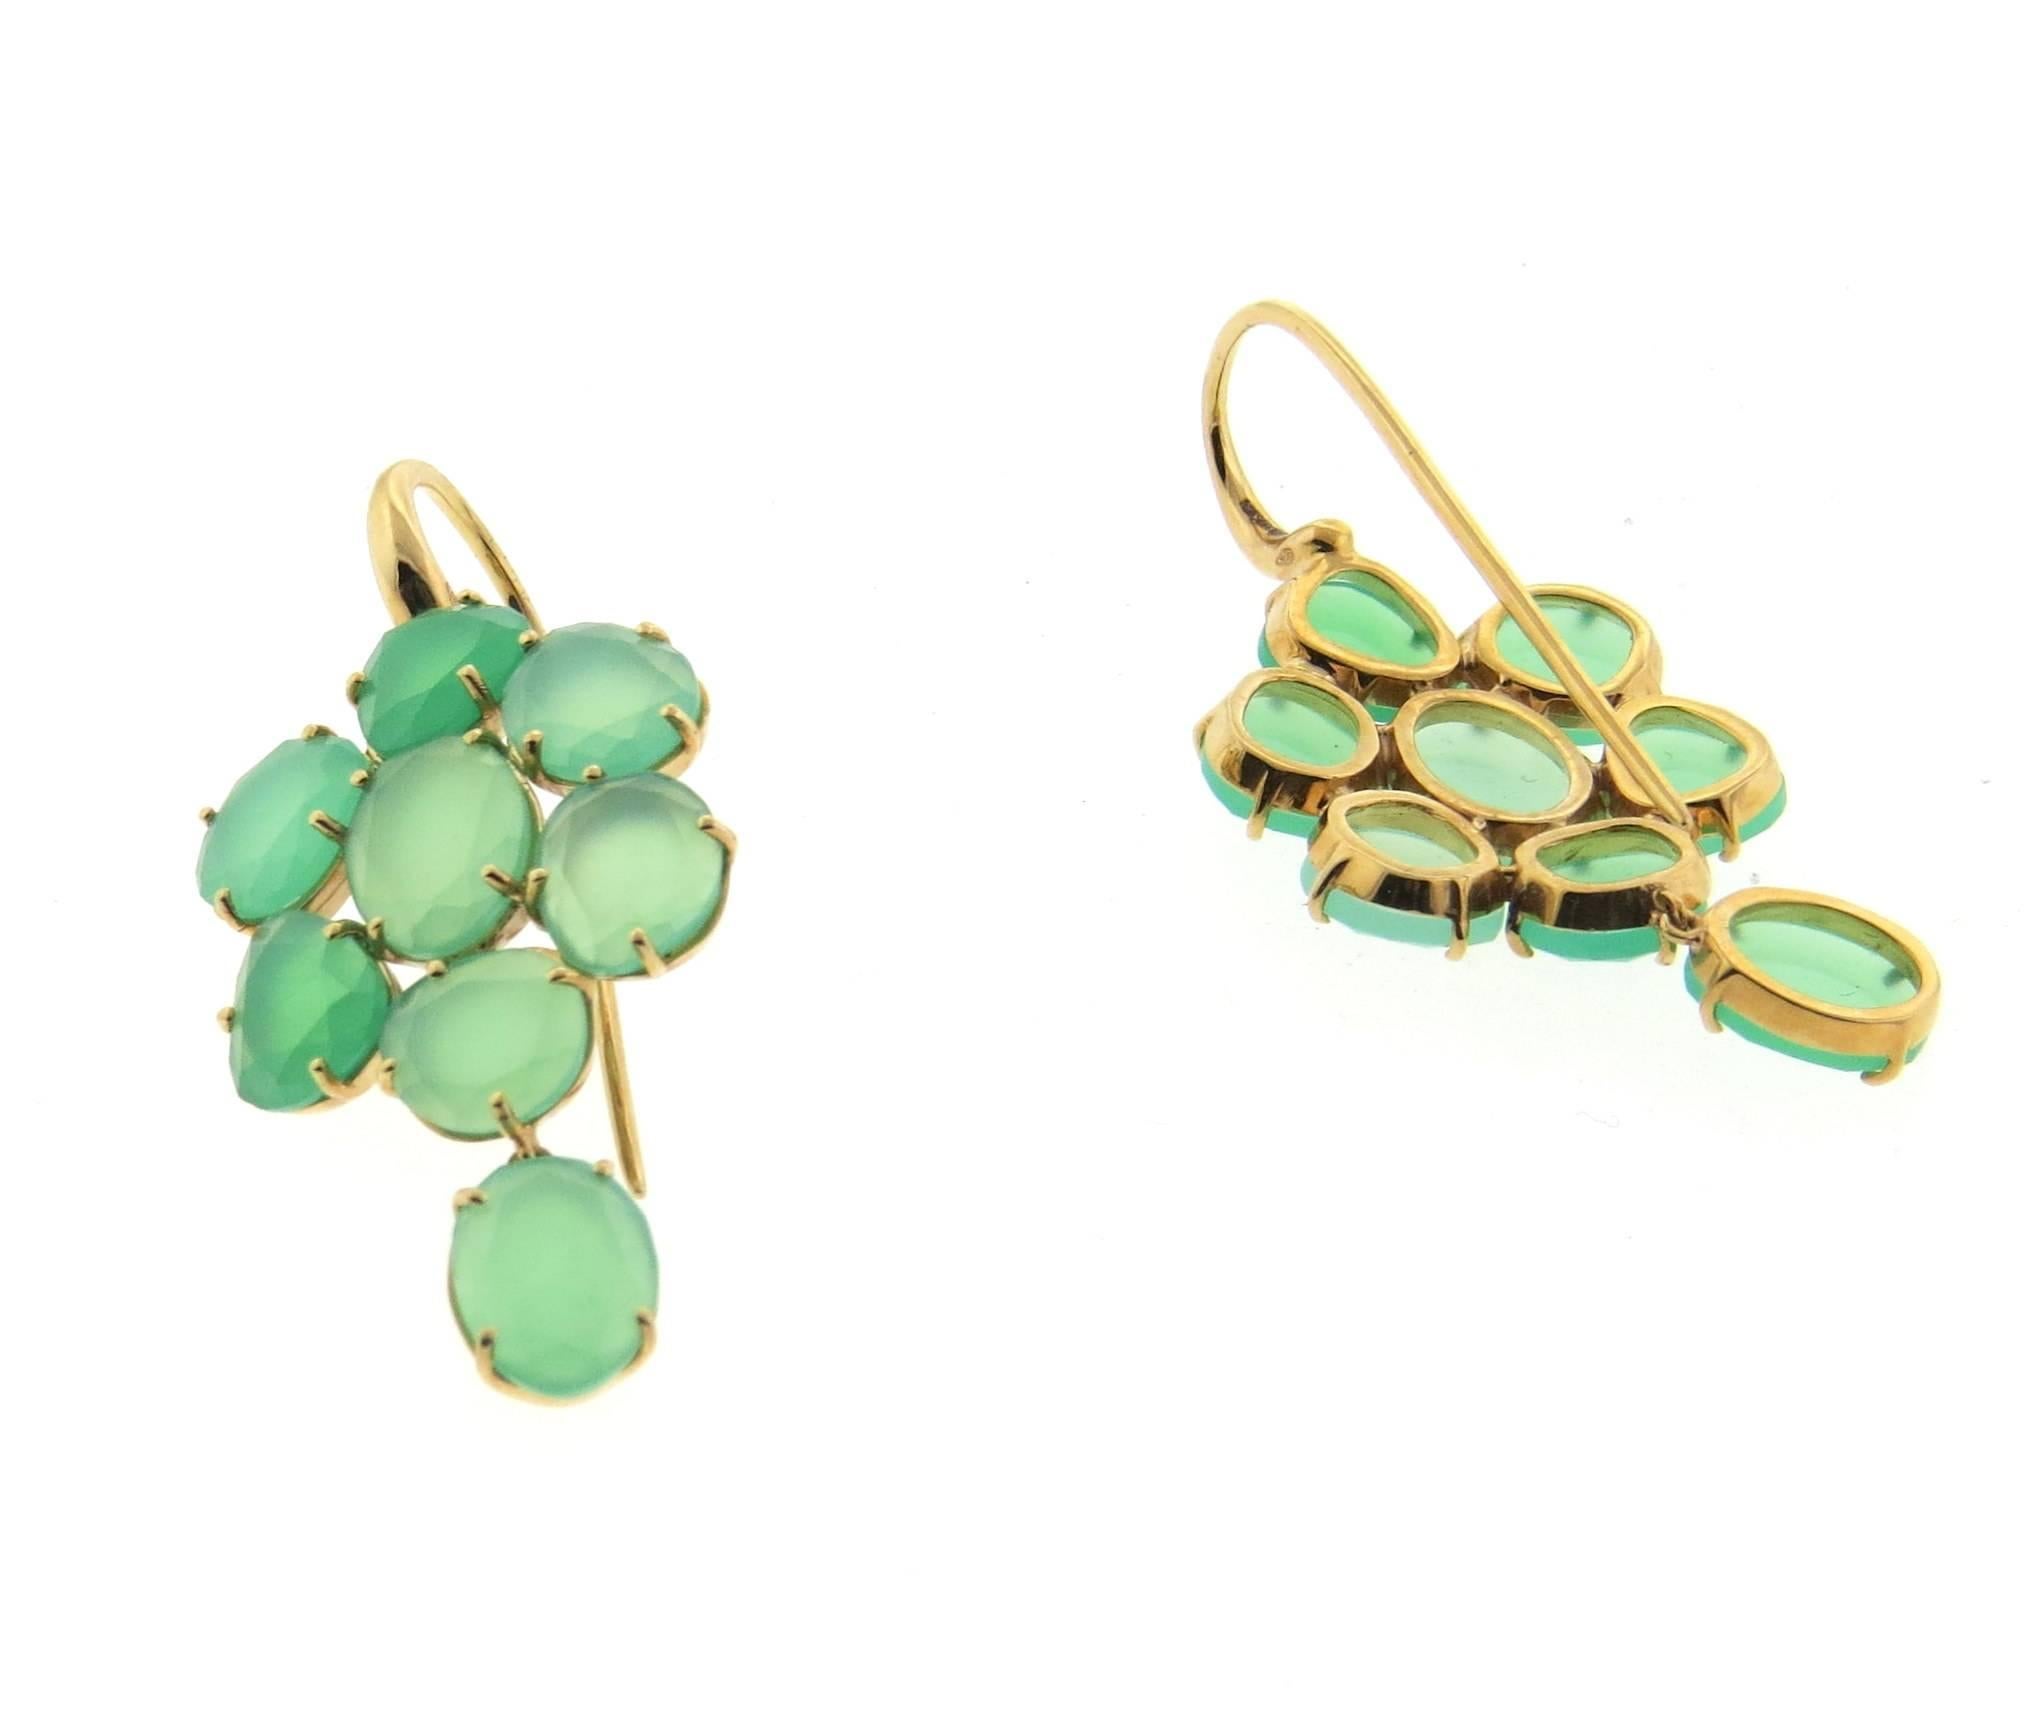 A pair of new 18k rose gold long drop earrings, crafted by Pomellato for Capri collection, set with chrysoprase gemstones.  Earrings are 47mm x 21mm. Weight - 14.3 grams
Retail $9000